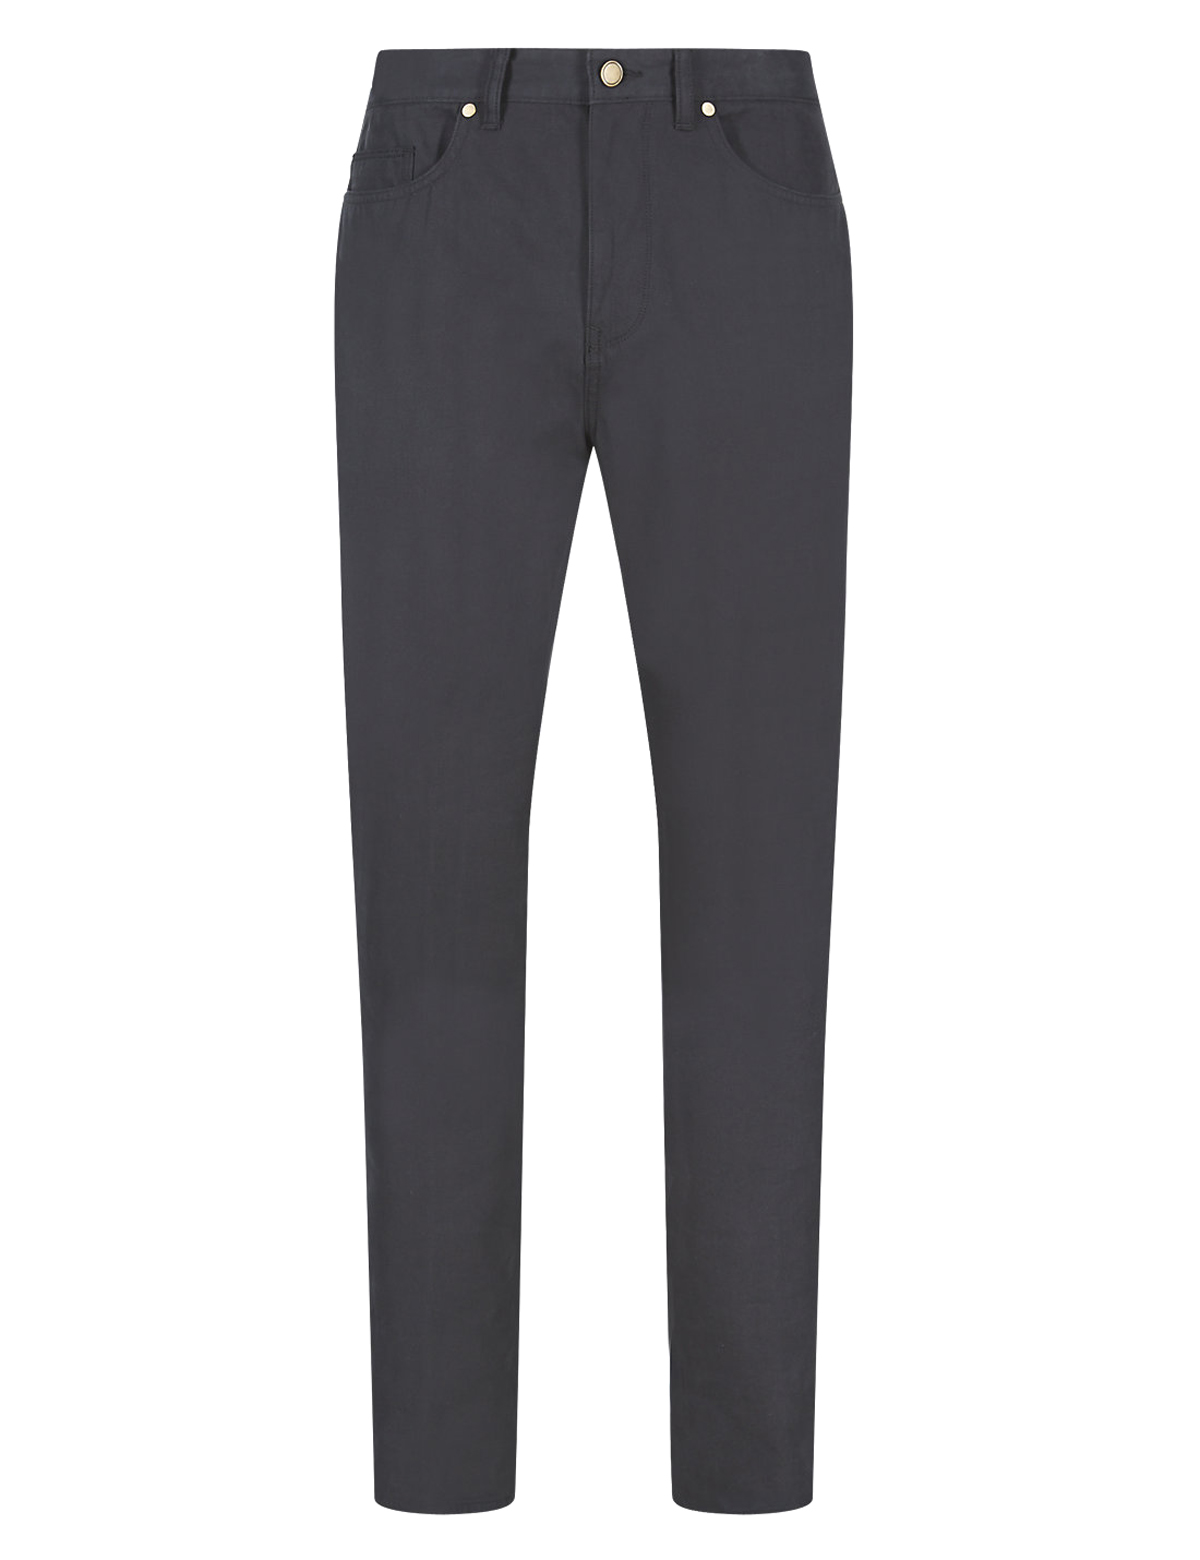 Marks and Spencer - - M&5 BLACK Cotton Rich Supersoft Tapered Leg ...